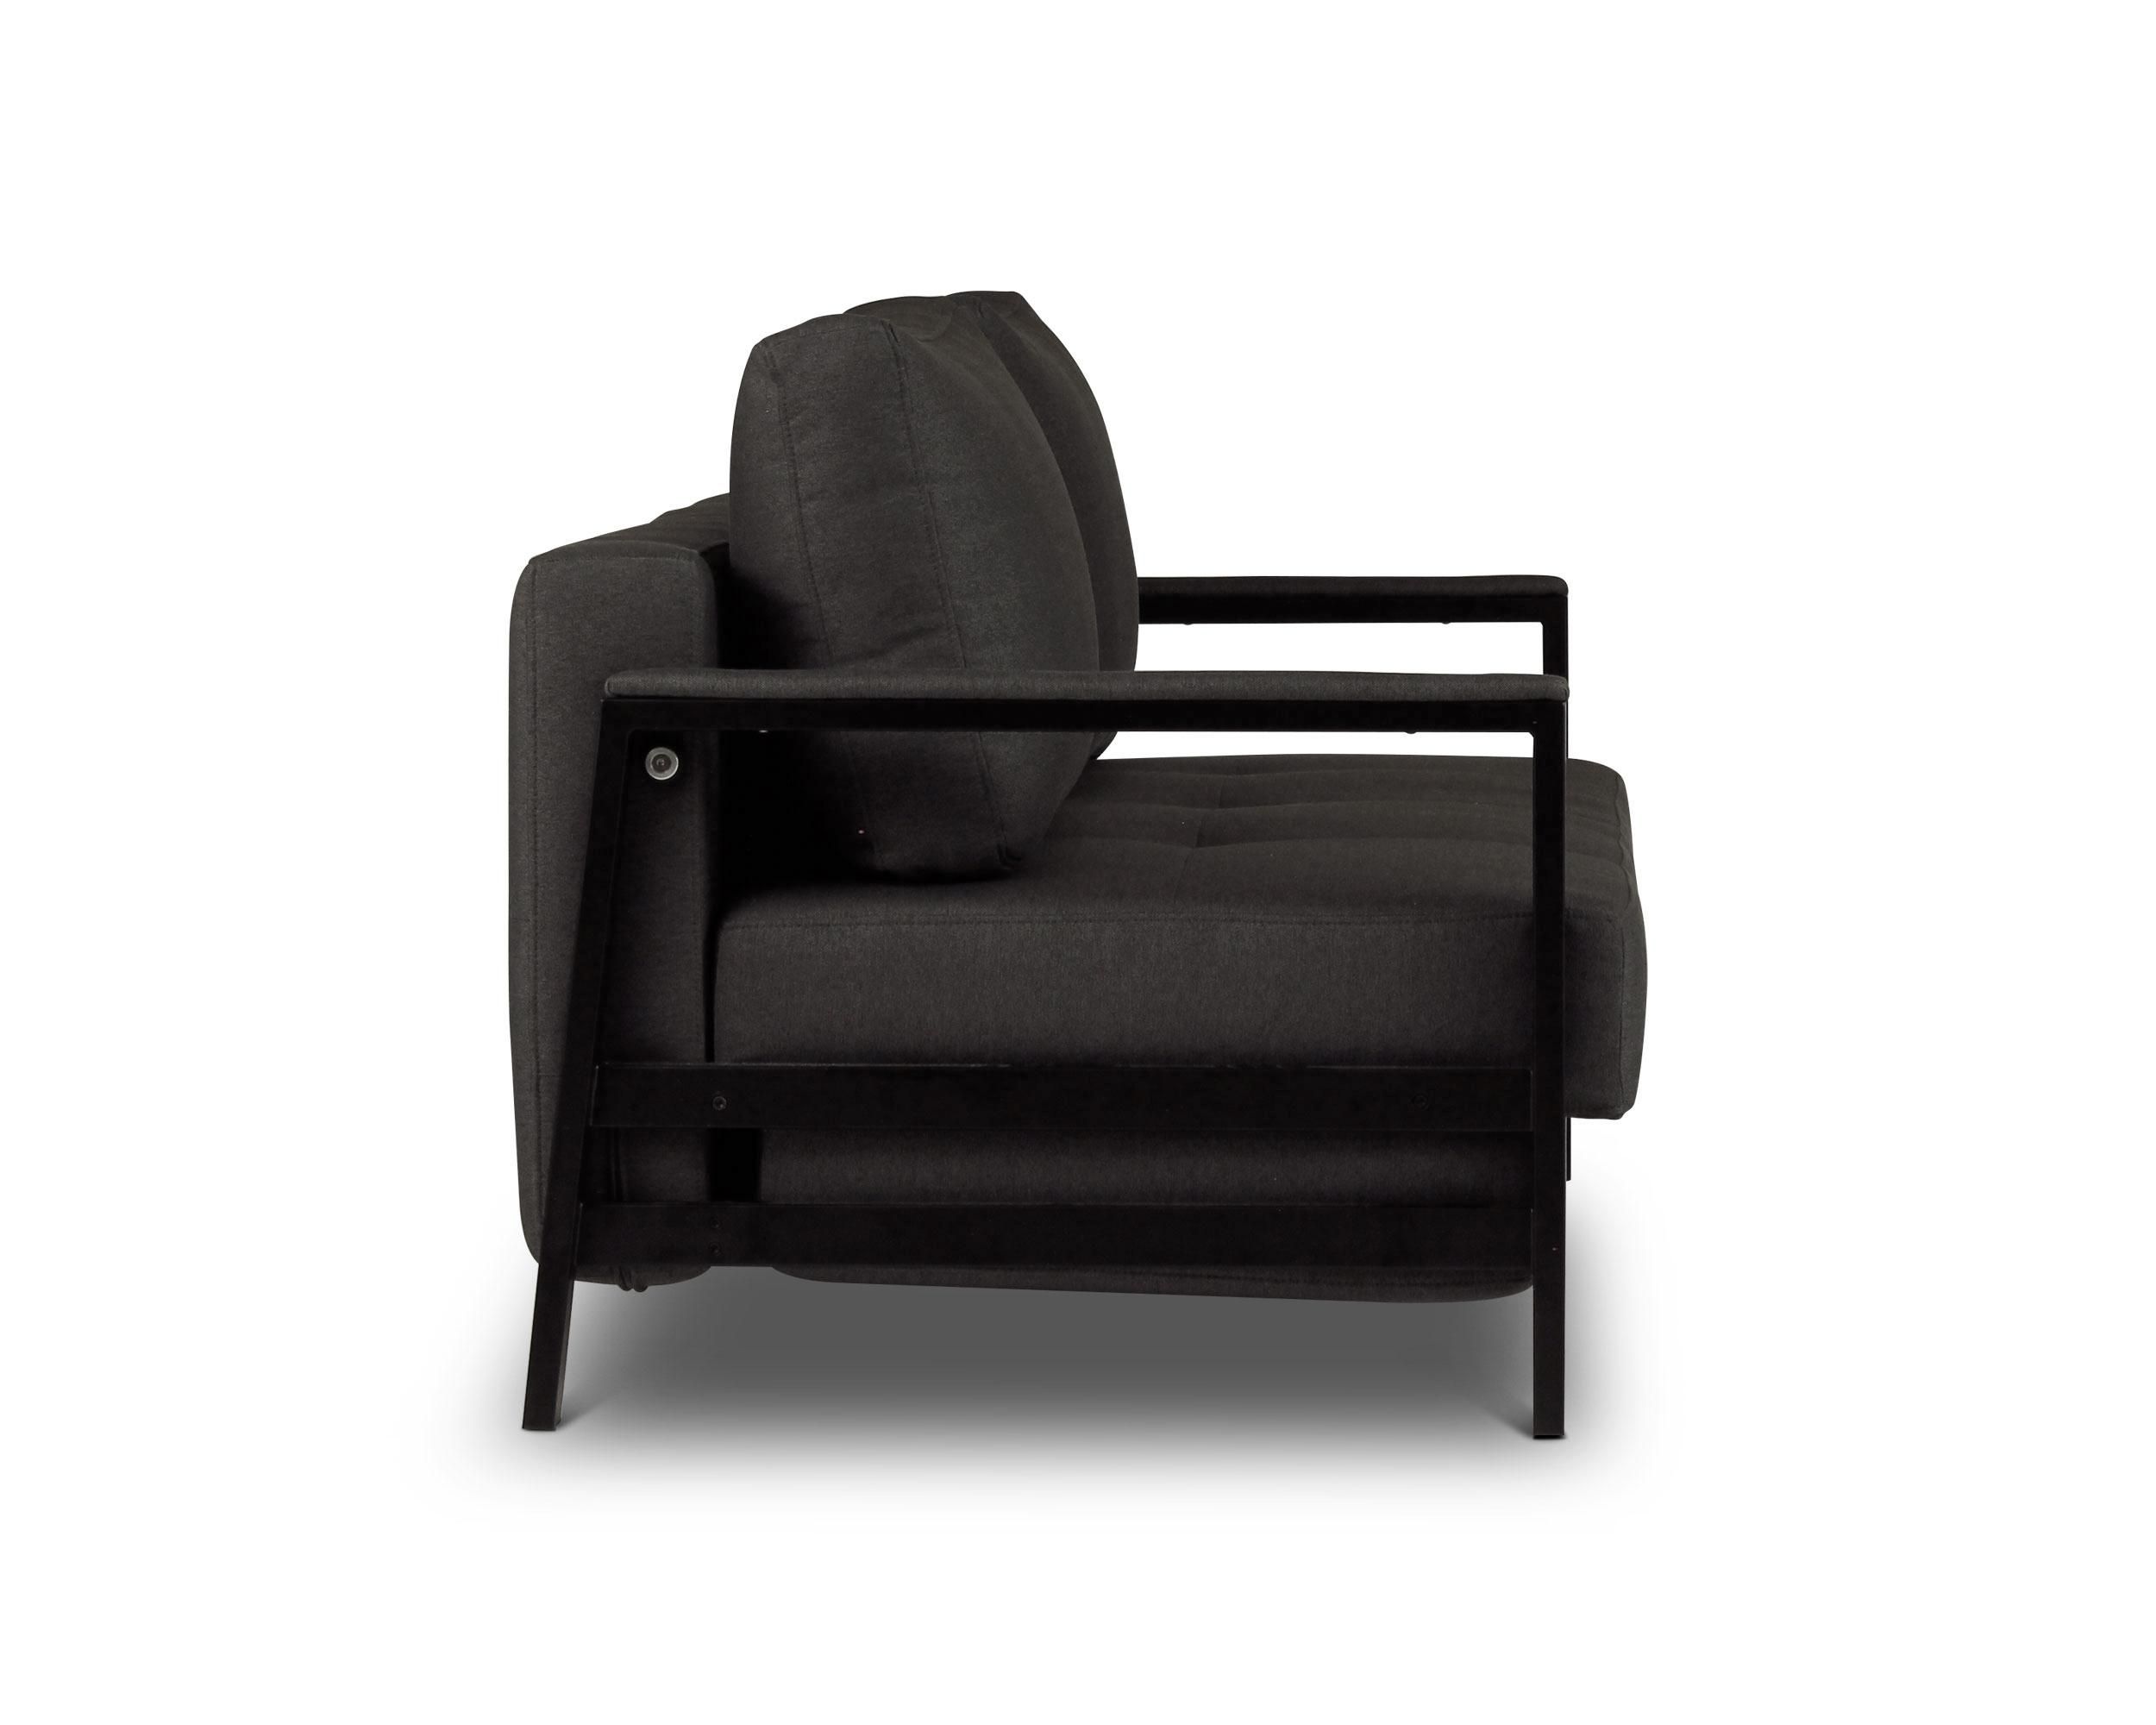 Kobe – 2 Seat Sofa Bed | Loungelovers Intended For Black 2 Seater Sofas (View 13 of 20)